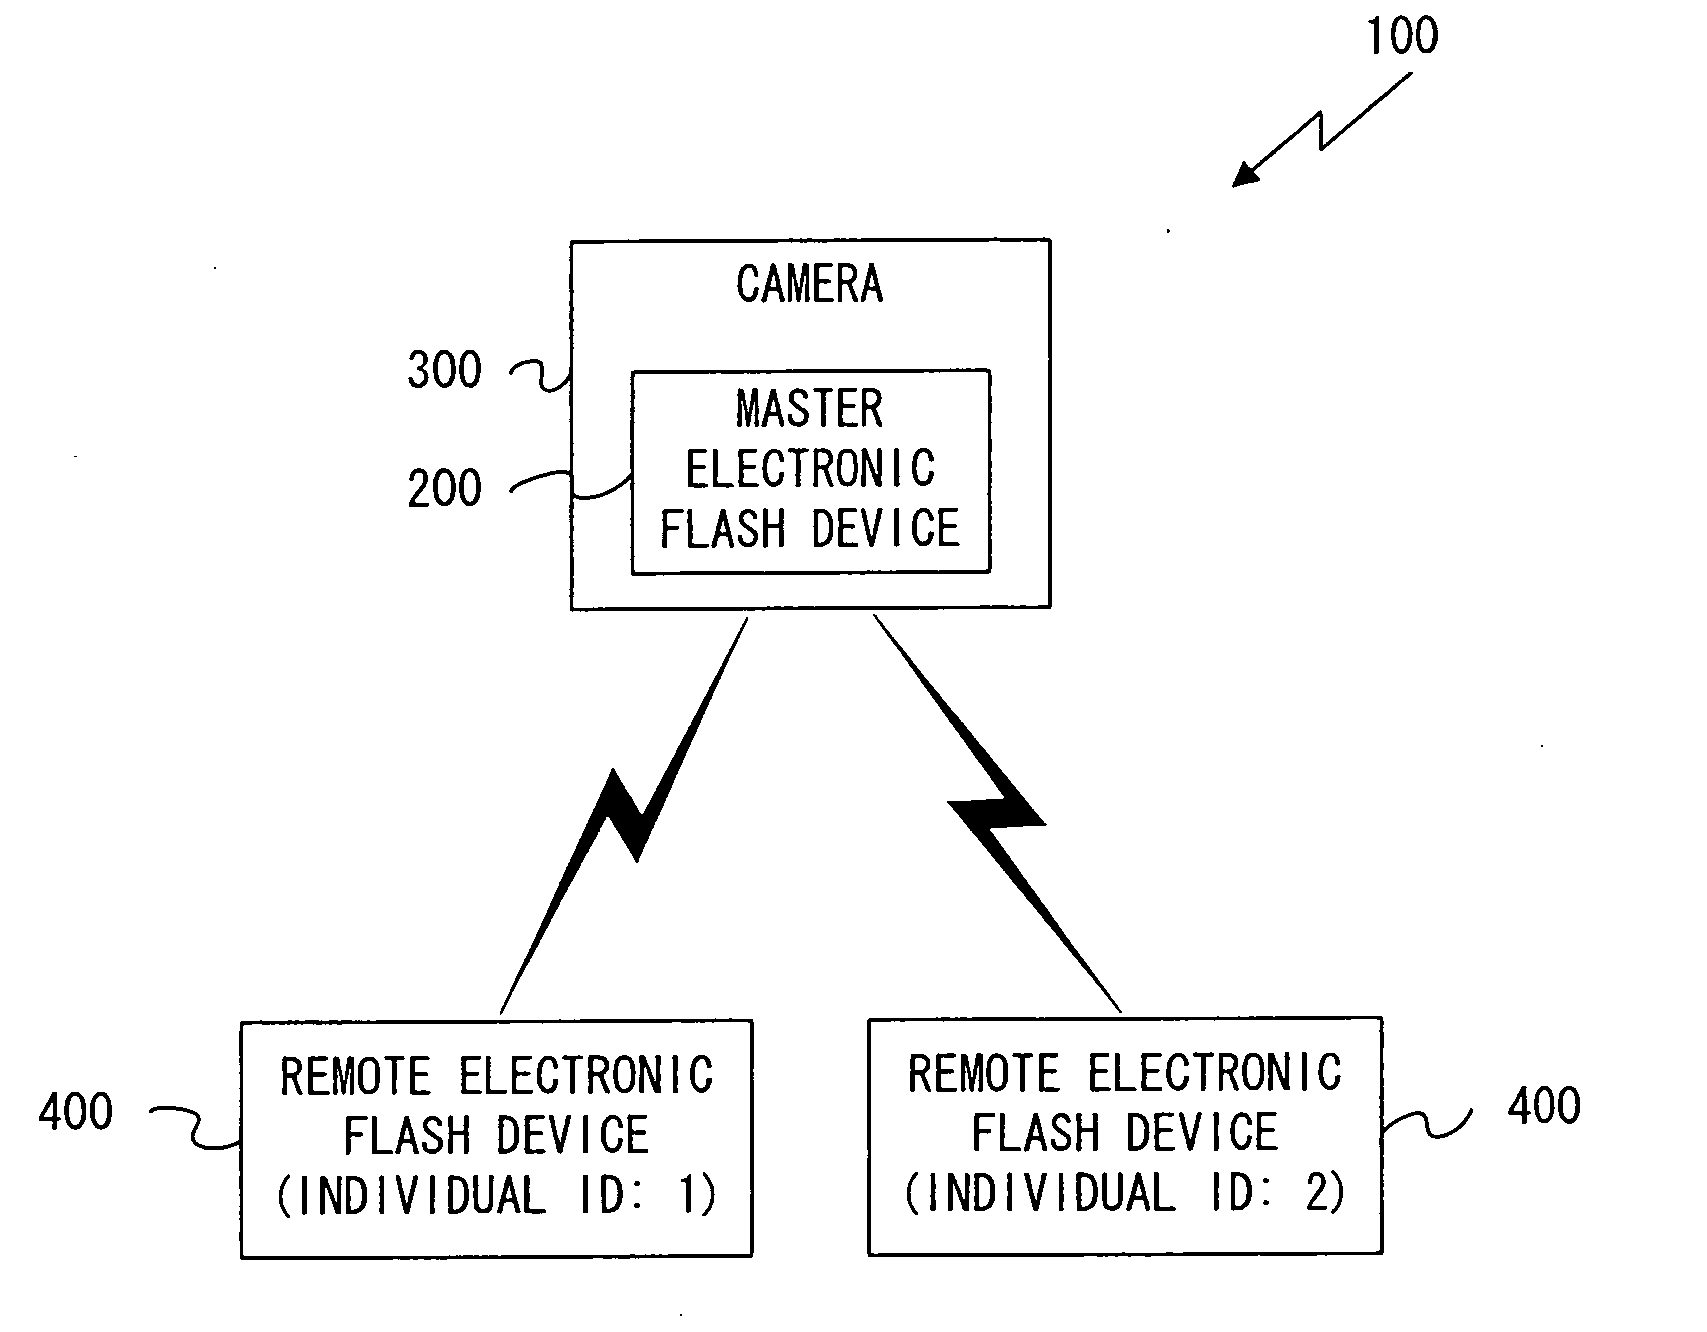 External device, electronic flash device, and camera